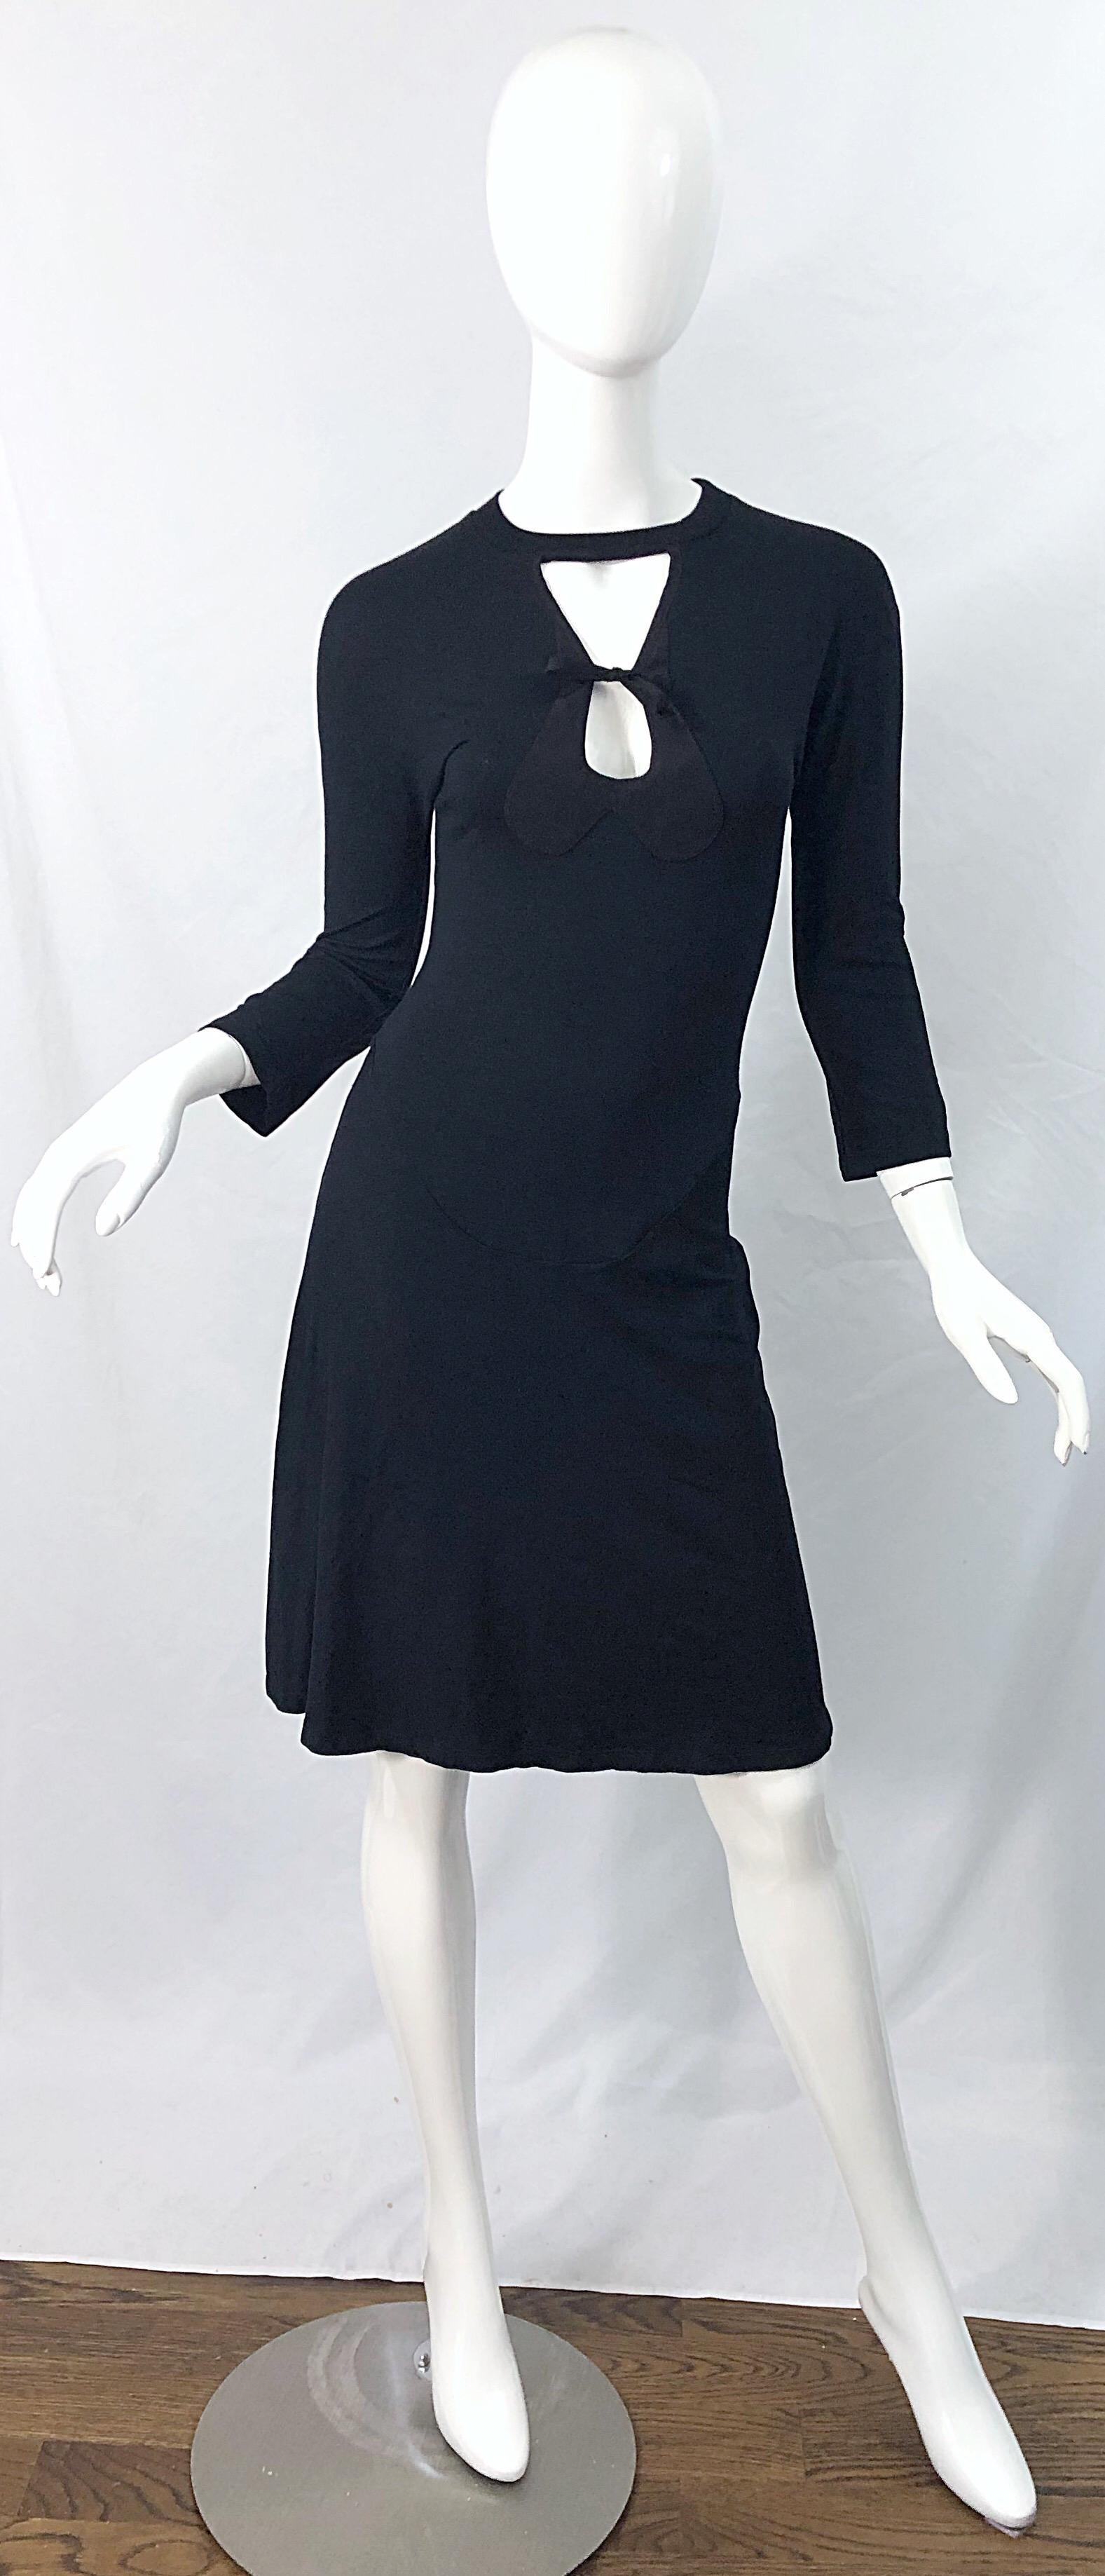 Sexy early 2000s GIBO black cut-out 3/4 sleeves dress ! Features cut-out above the bust that ties at the center. Simply slips over the head and stretches to fit. The perfect little black dress with so much attention to details. Soft Rayon (80%),